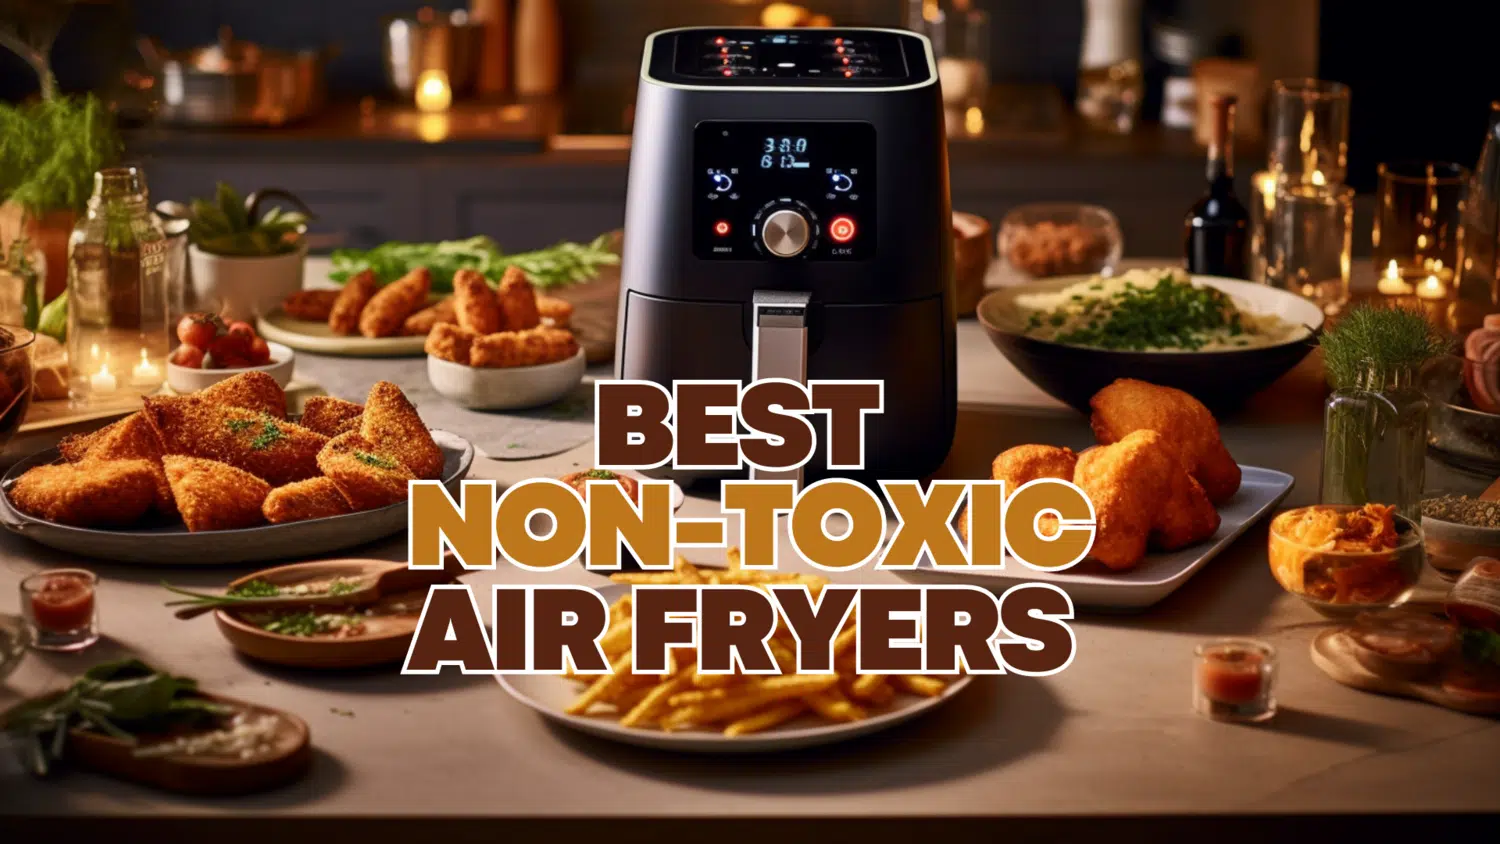  ecozy Air Fryer 6 Quart with Smart WiFi, See-Through